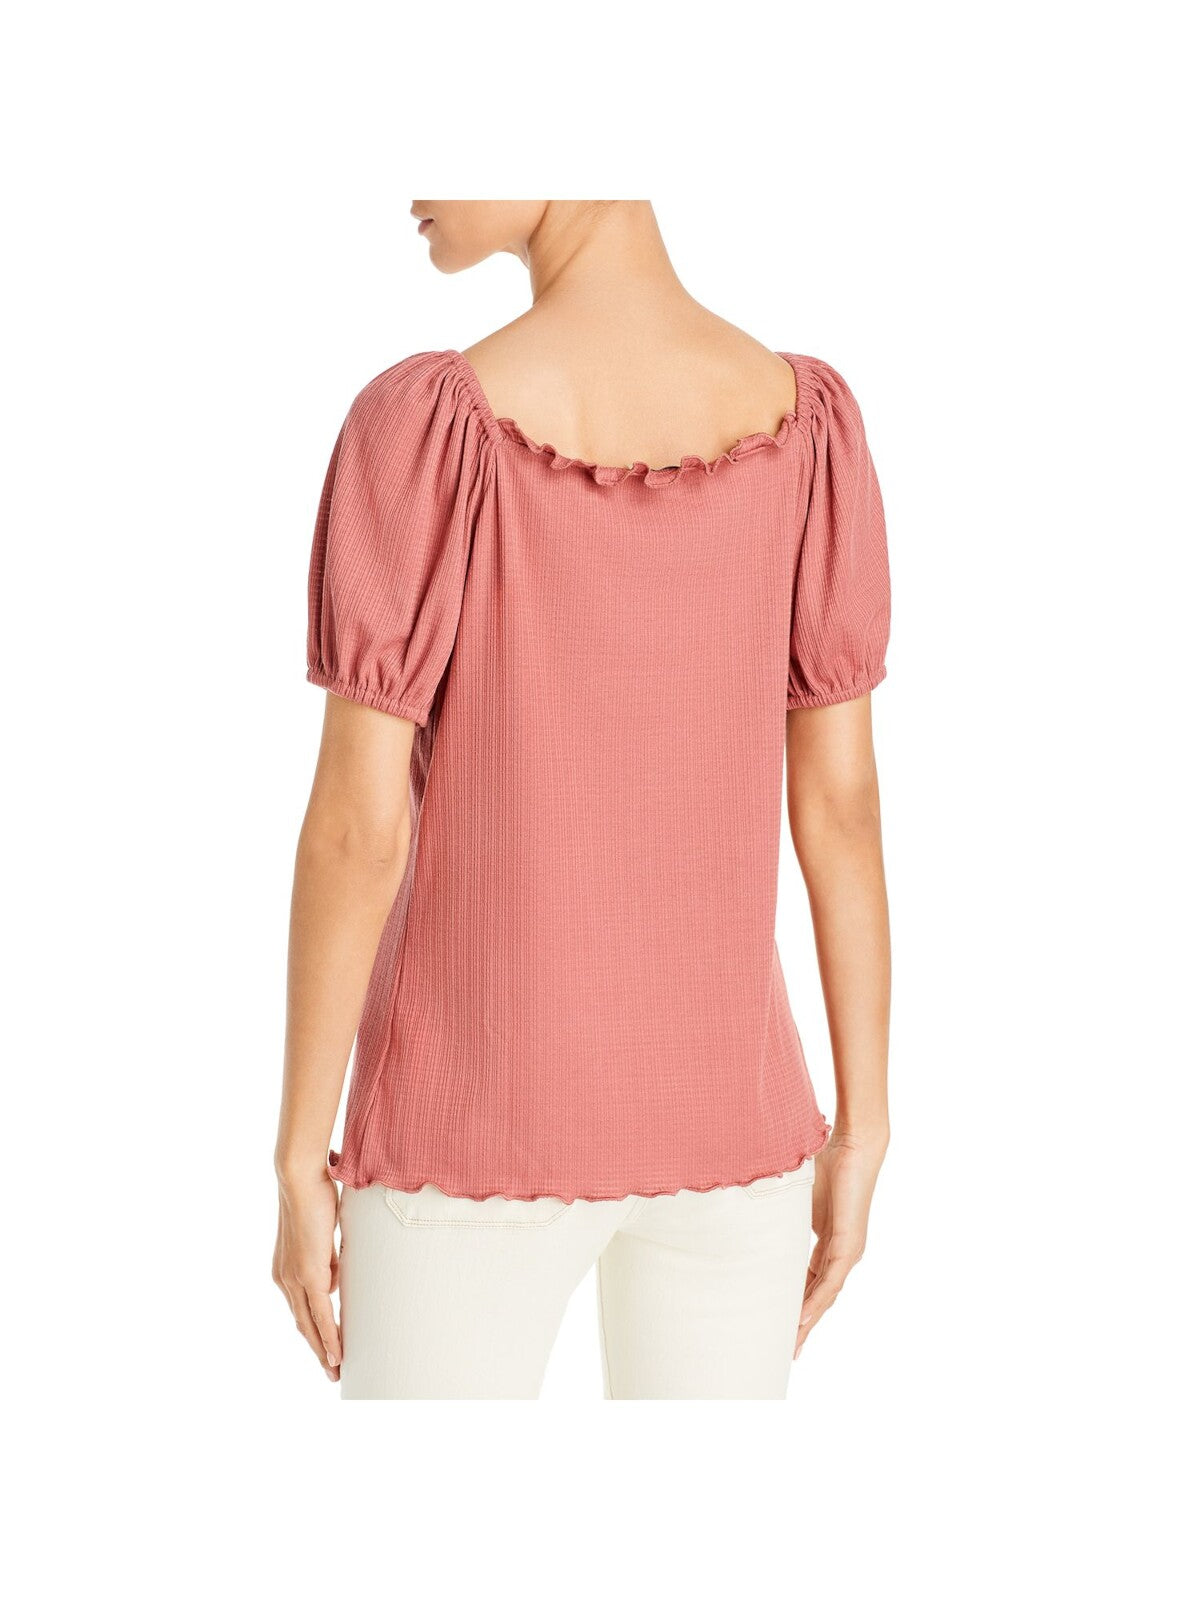 STATUS BY CHENAULT Womens Stretch Ruffled Pleated Scalloped Ruched Pouf Sleeve Sweetheart Neckline Top